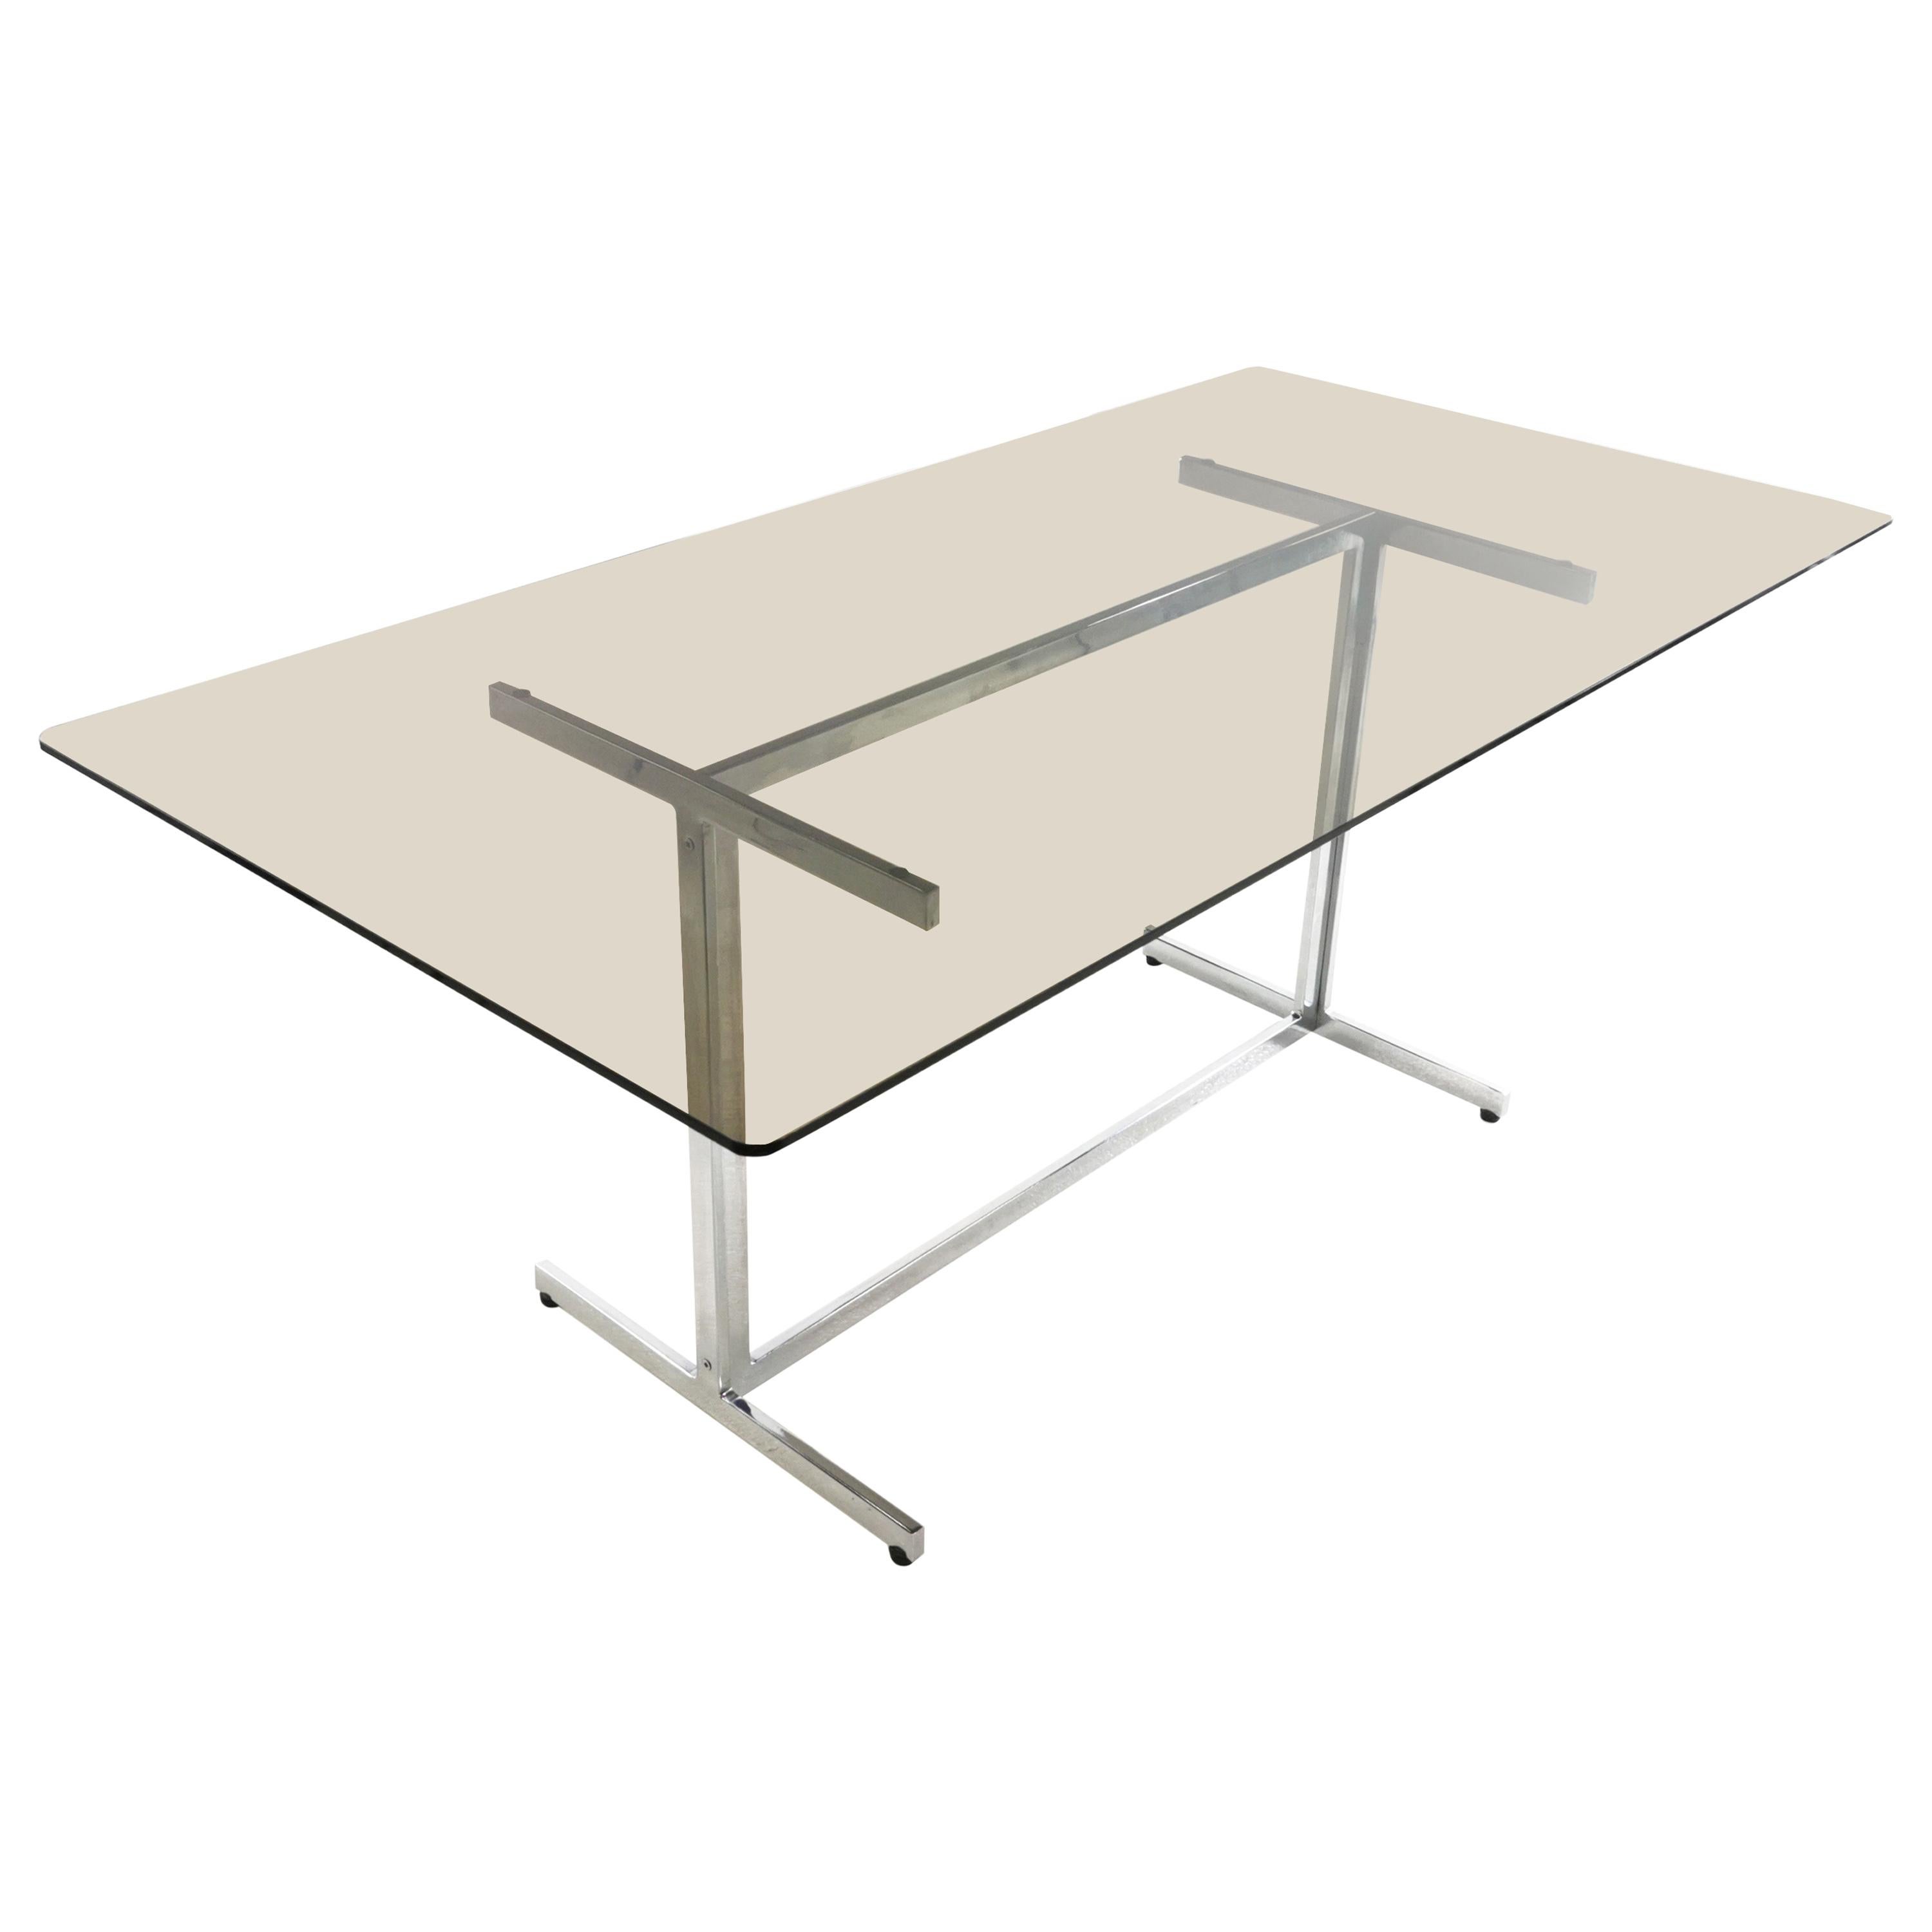 Tim Bates for Pieff Glass & Chrome Dining Table Desk Midcentury Vintage